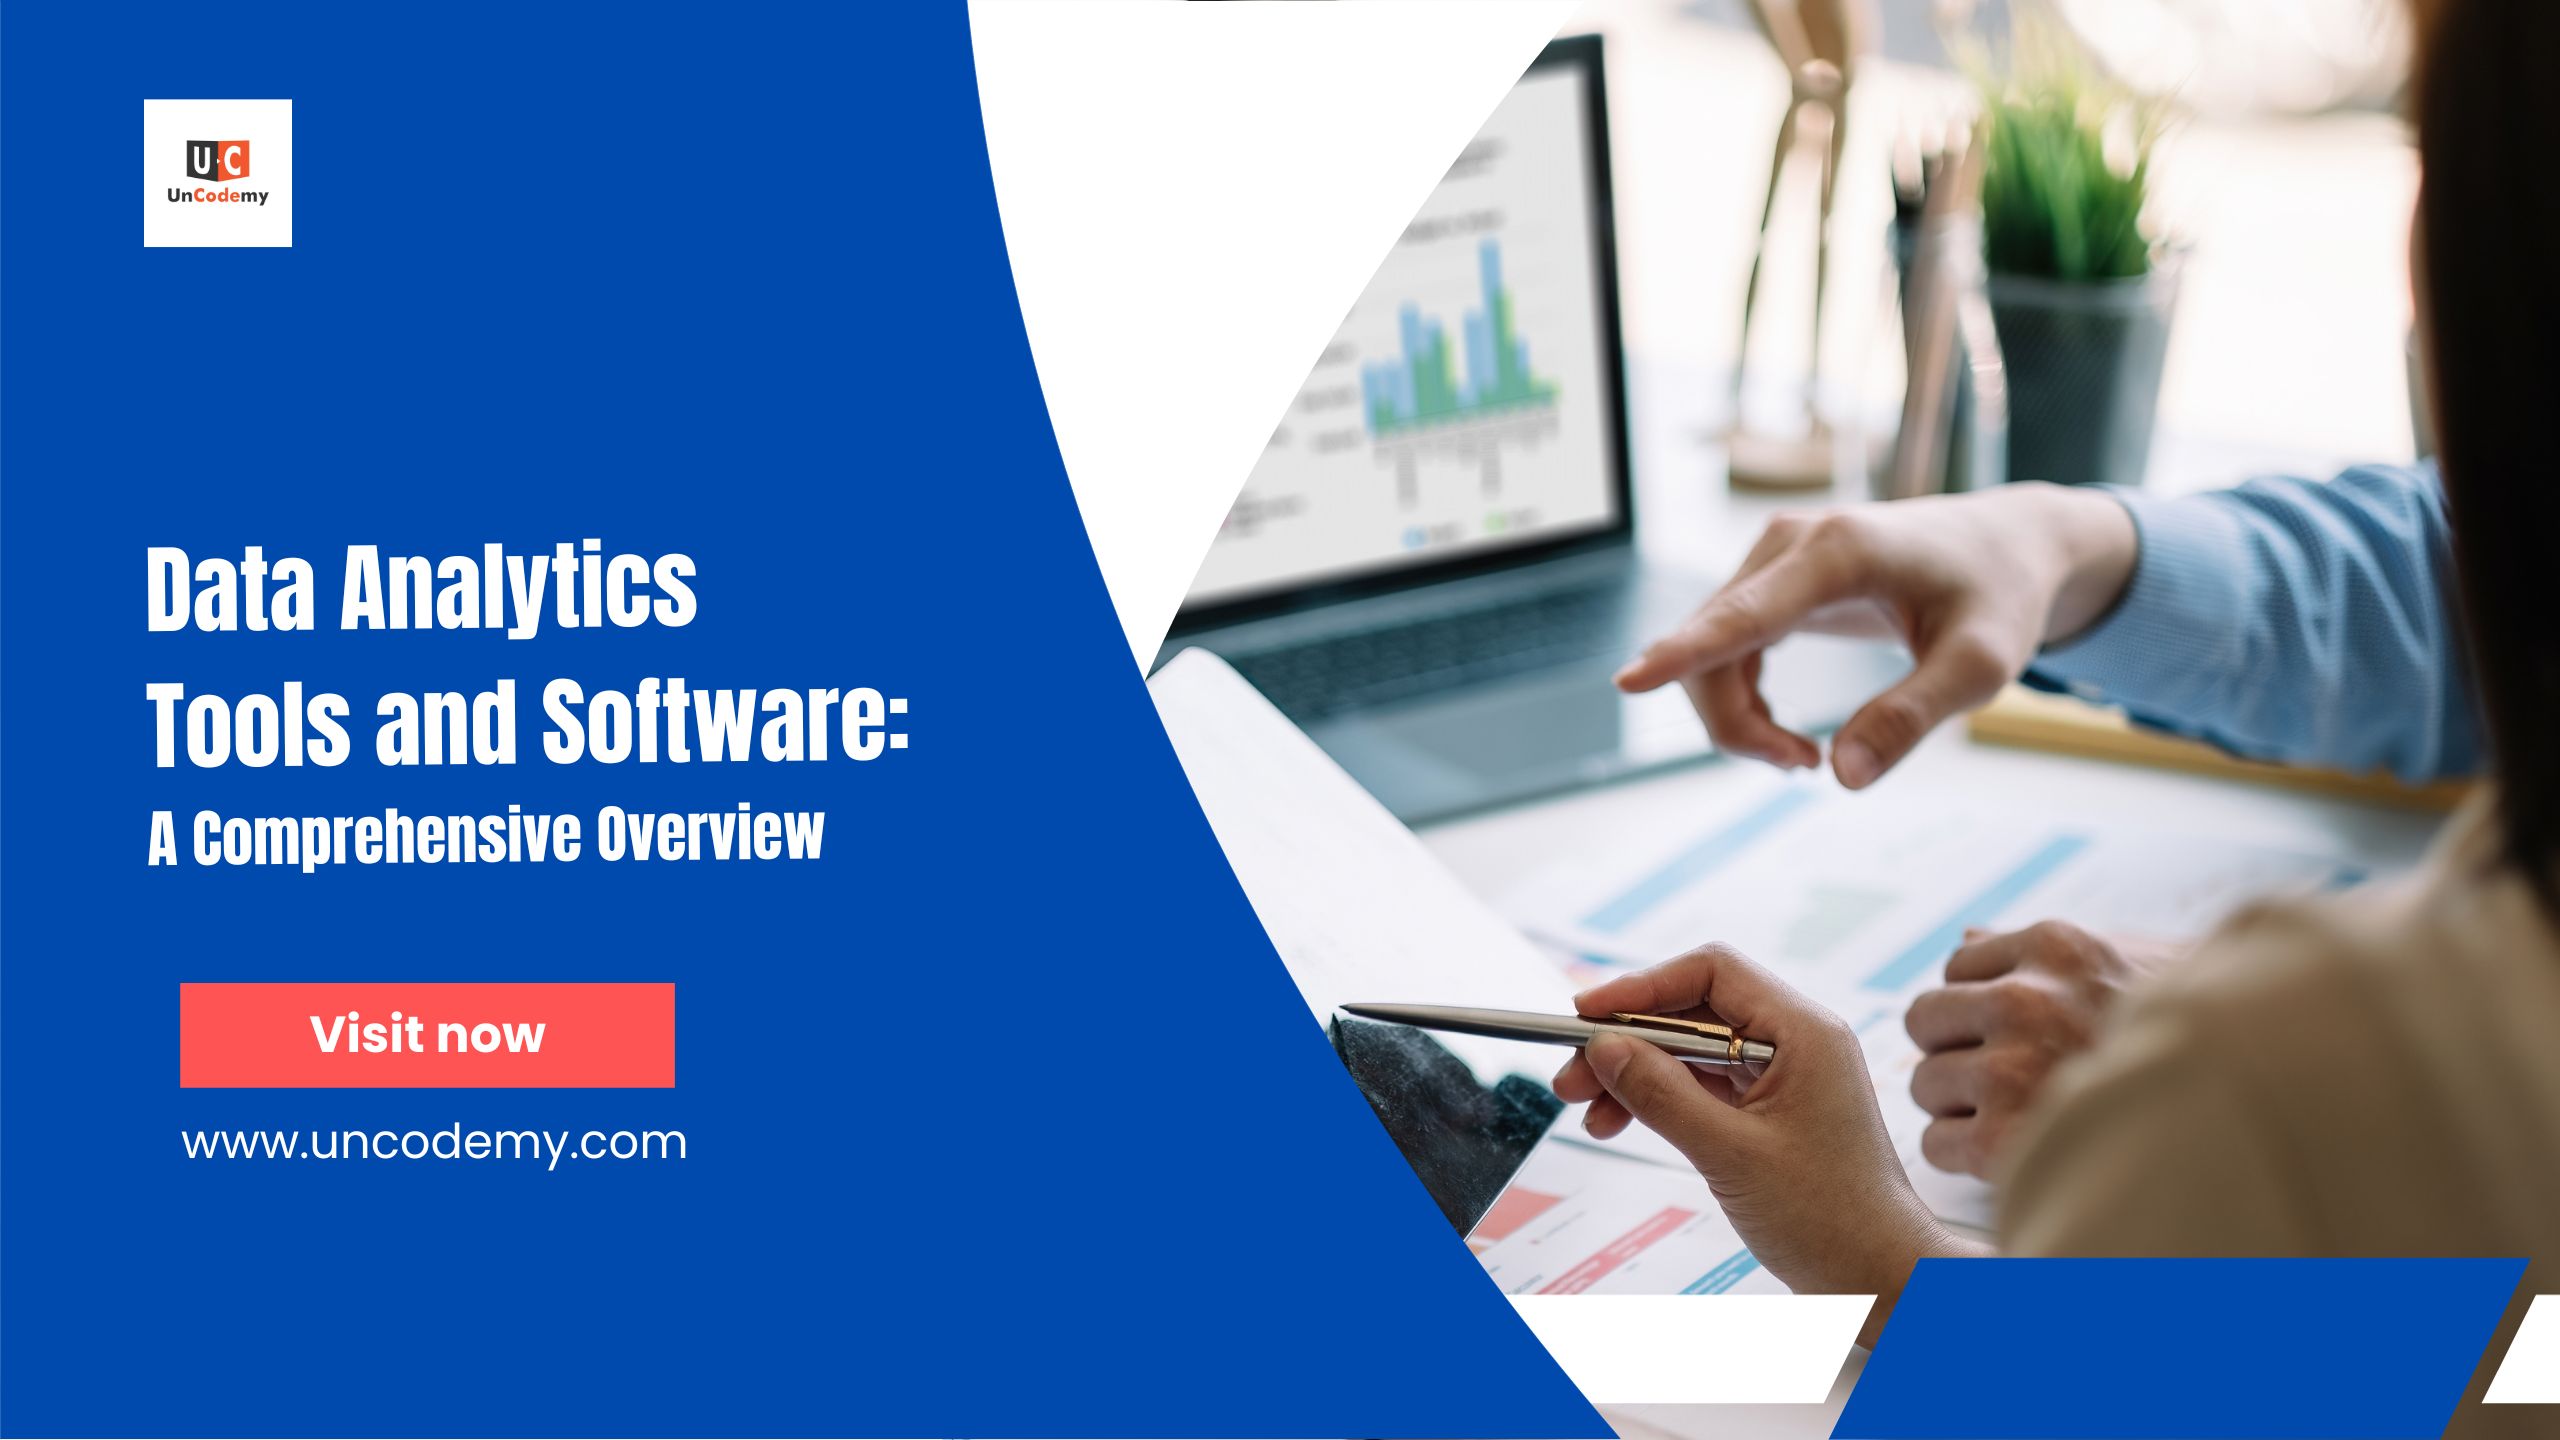 Data Analytics Tools and Software: A Comprehensive Overview